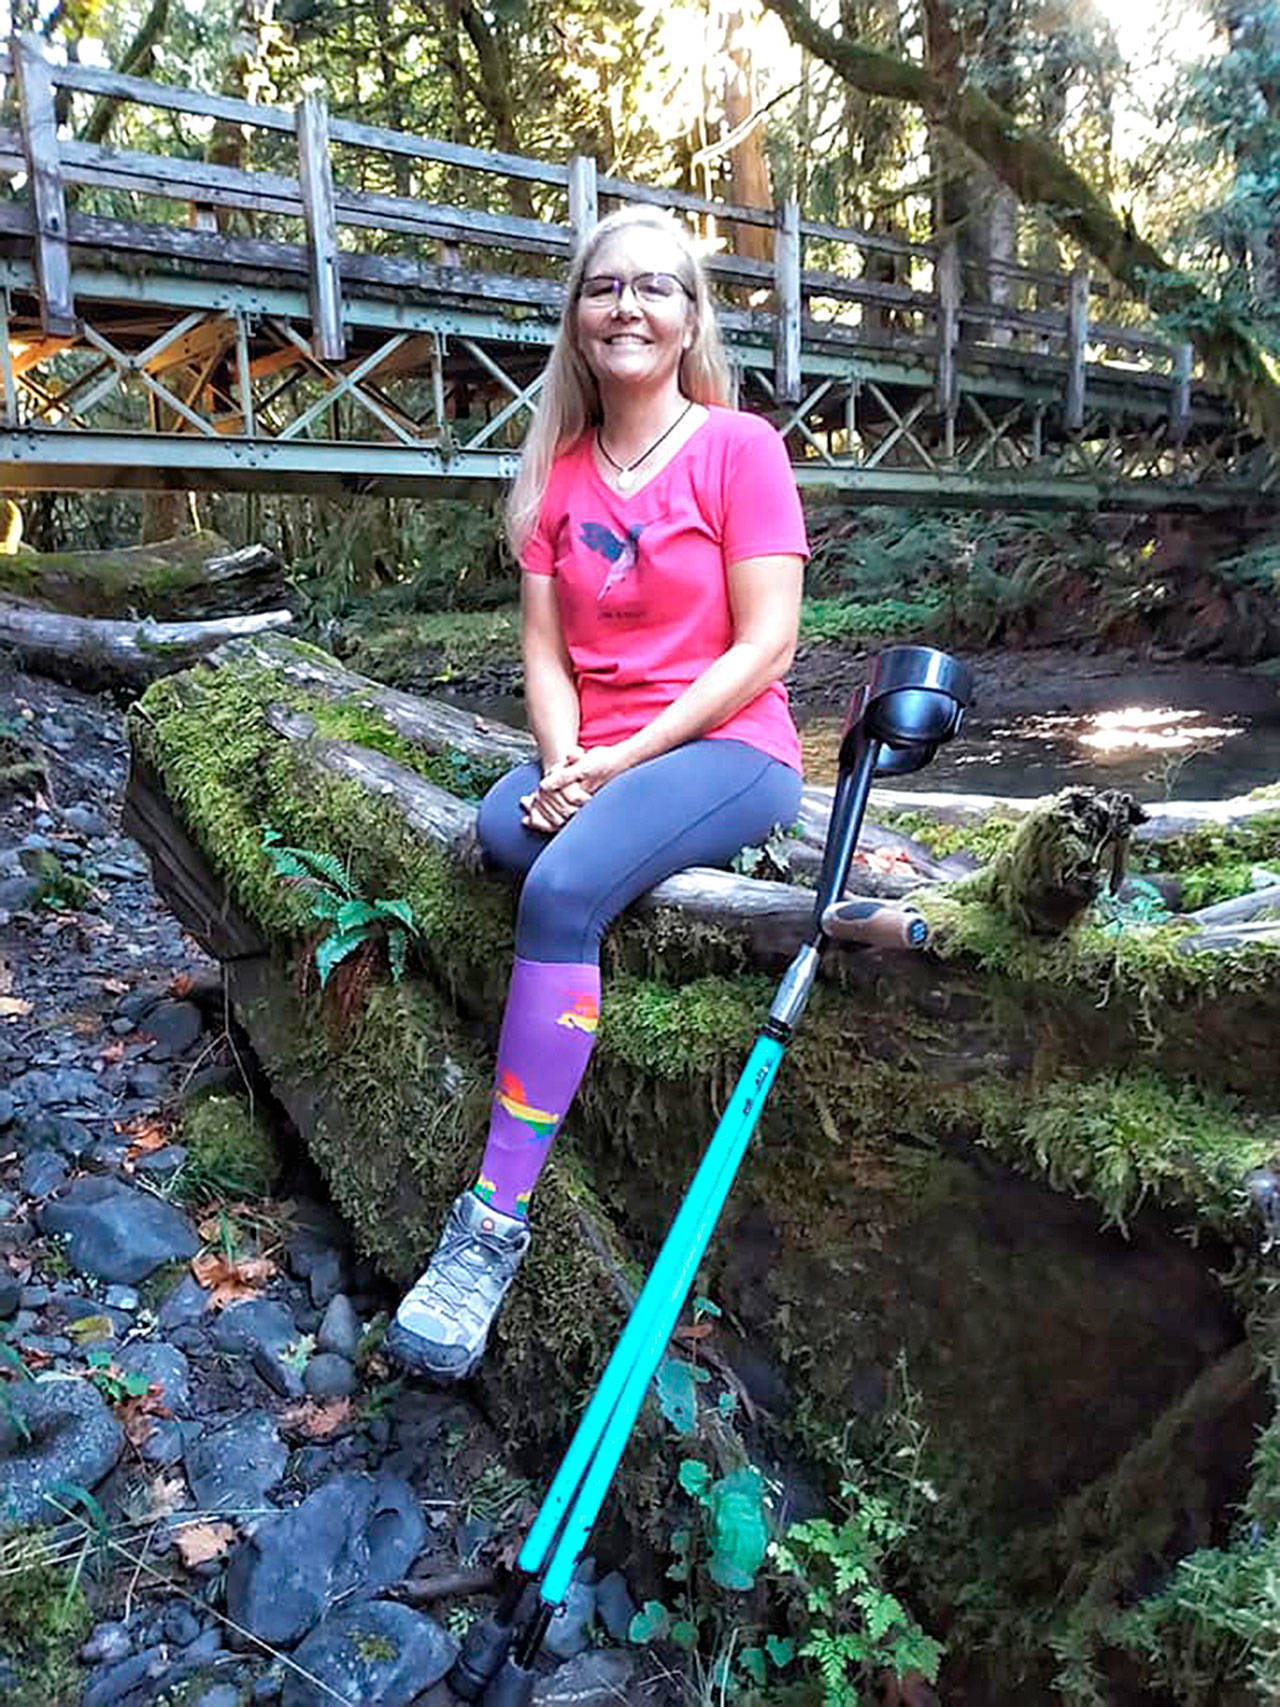 Port Angeles amputee Dana Lawson is a survivor of multiple bouts of cancer and domestic violence. She plans to compete in the North Olympic Discovery Marathon in June to raise awareness for her group Unbounded Horizons, which helps domestic violence survivors heal through nature. (Photo courtesy of Colton McCoy)